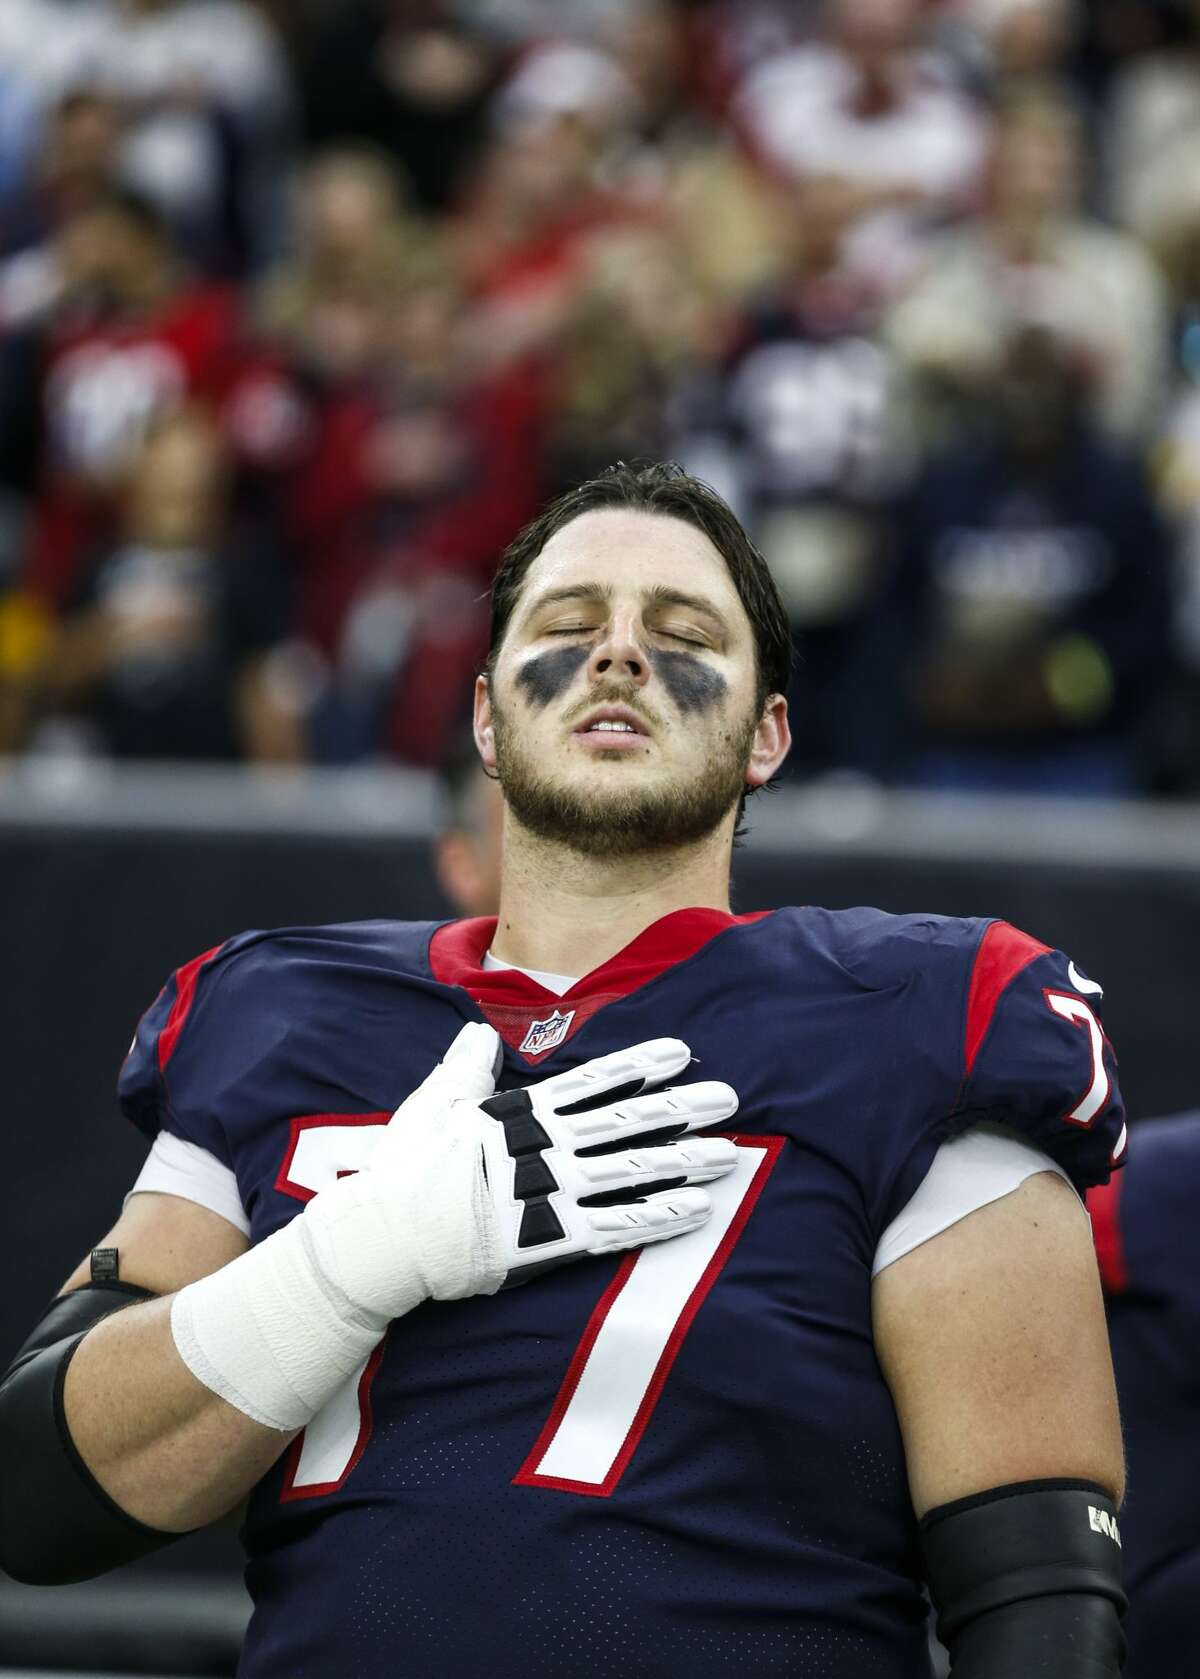 Houston Texans offensive guard David Quessenberry (77) closes his eyes as he stands for the national anthem before an NFL football game against the Pittsburgh Steelers at NRG Stadium on Monday, Dec. 25, 2017, in Houston. ( Brett Coomer / Houston Chronicle )